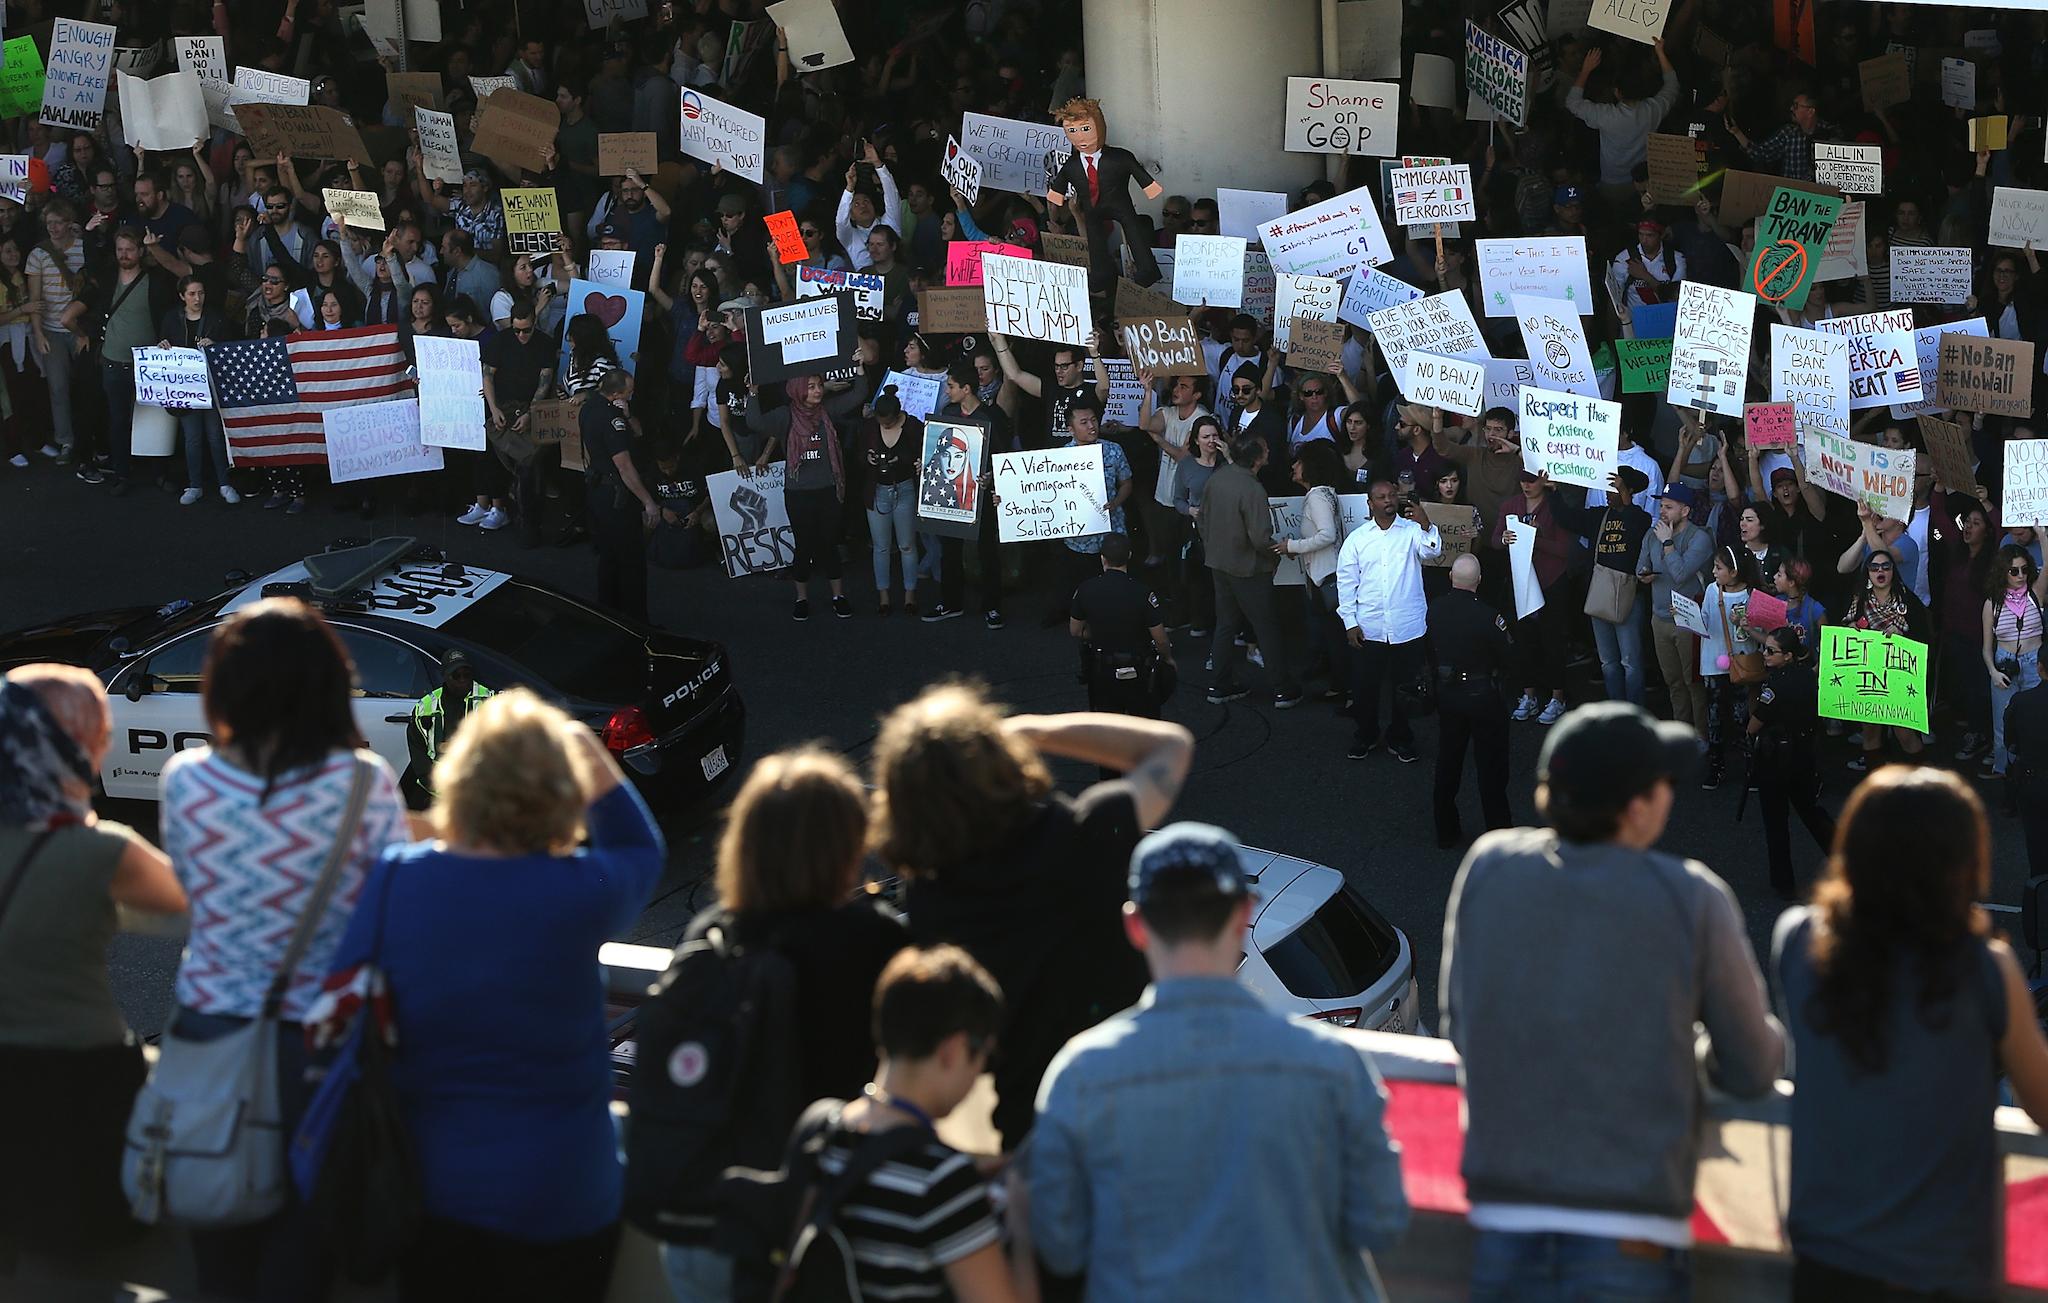 Protesters hold signs during a demonstration against the immigration ban that was imposed by U.S. President Donald Trump at Los Angeles International Airport on January 29, 2017